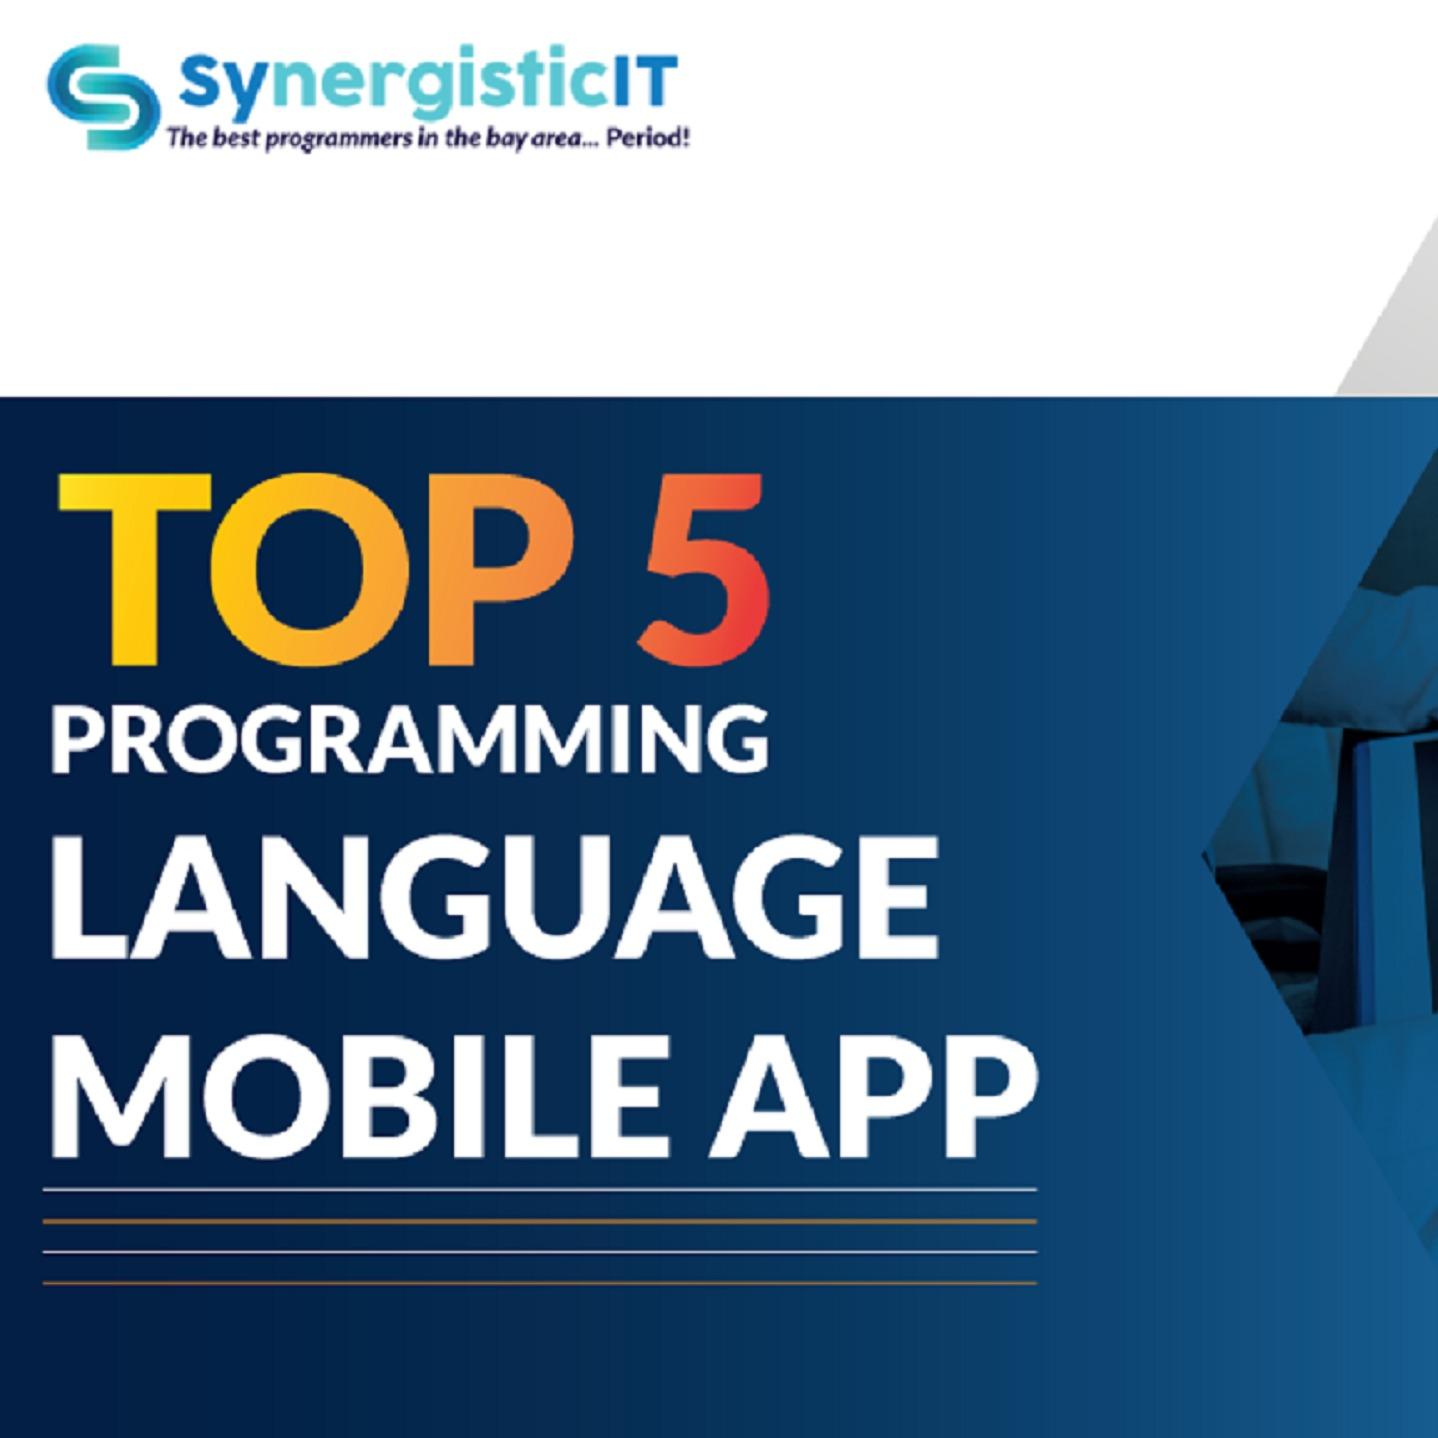 Top 5 Programming languages for Mobile App